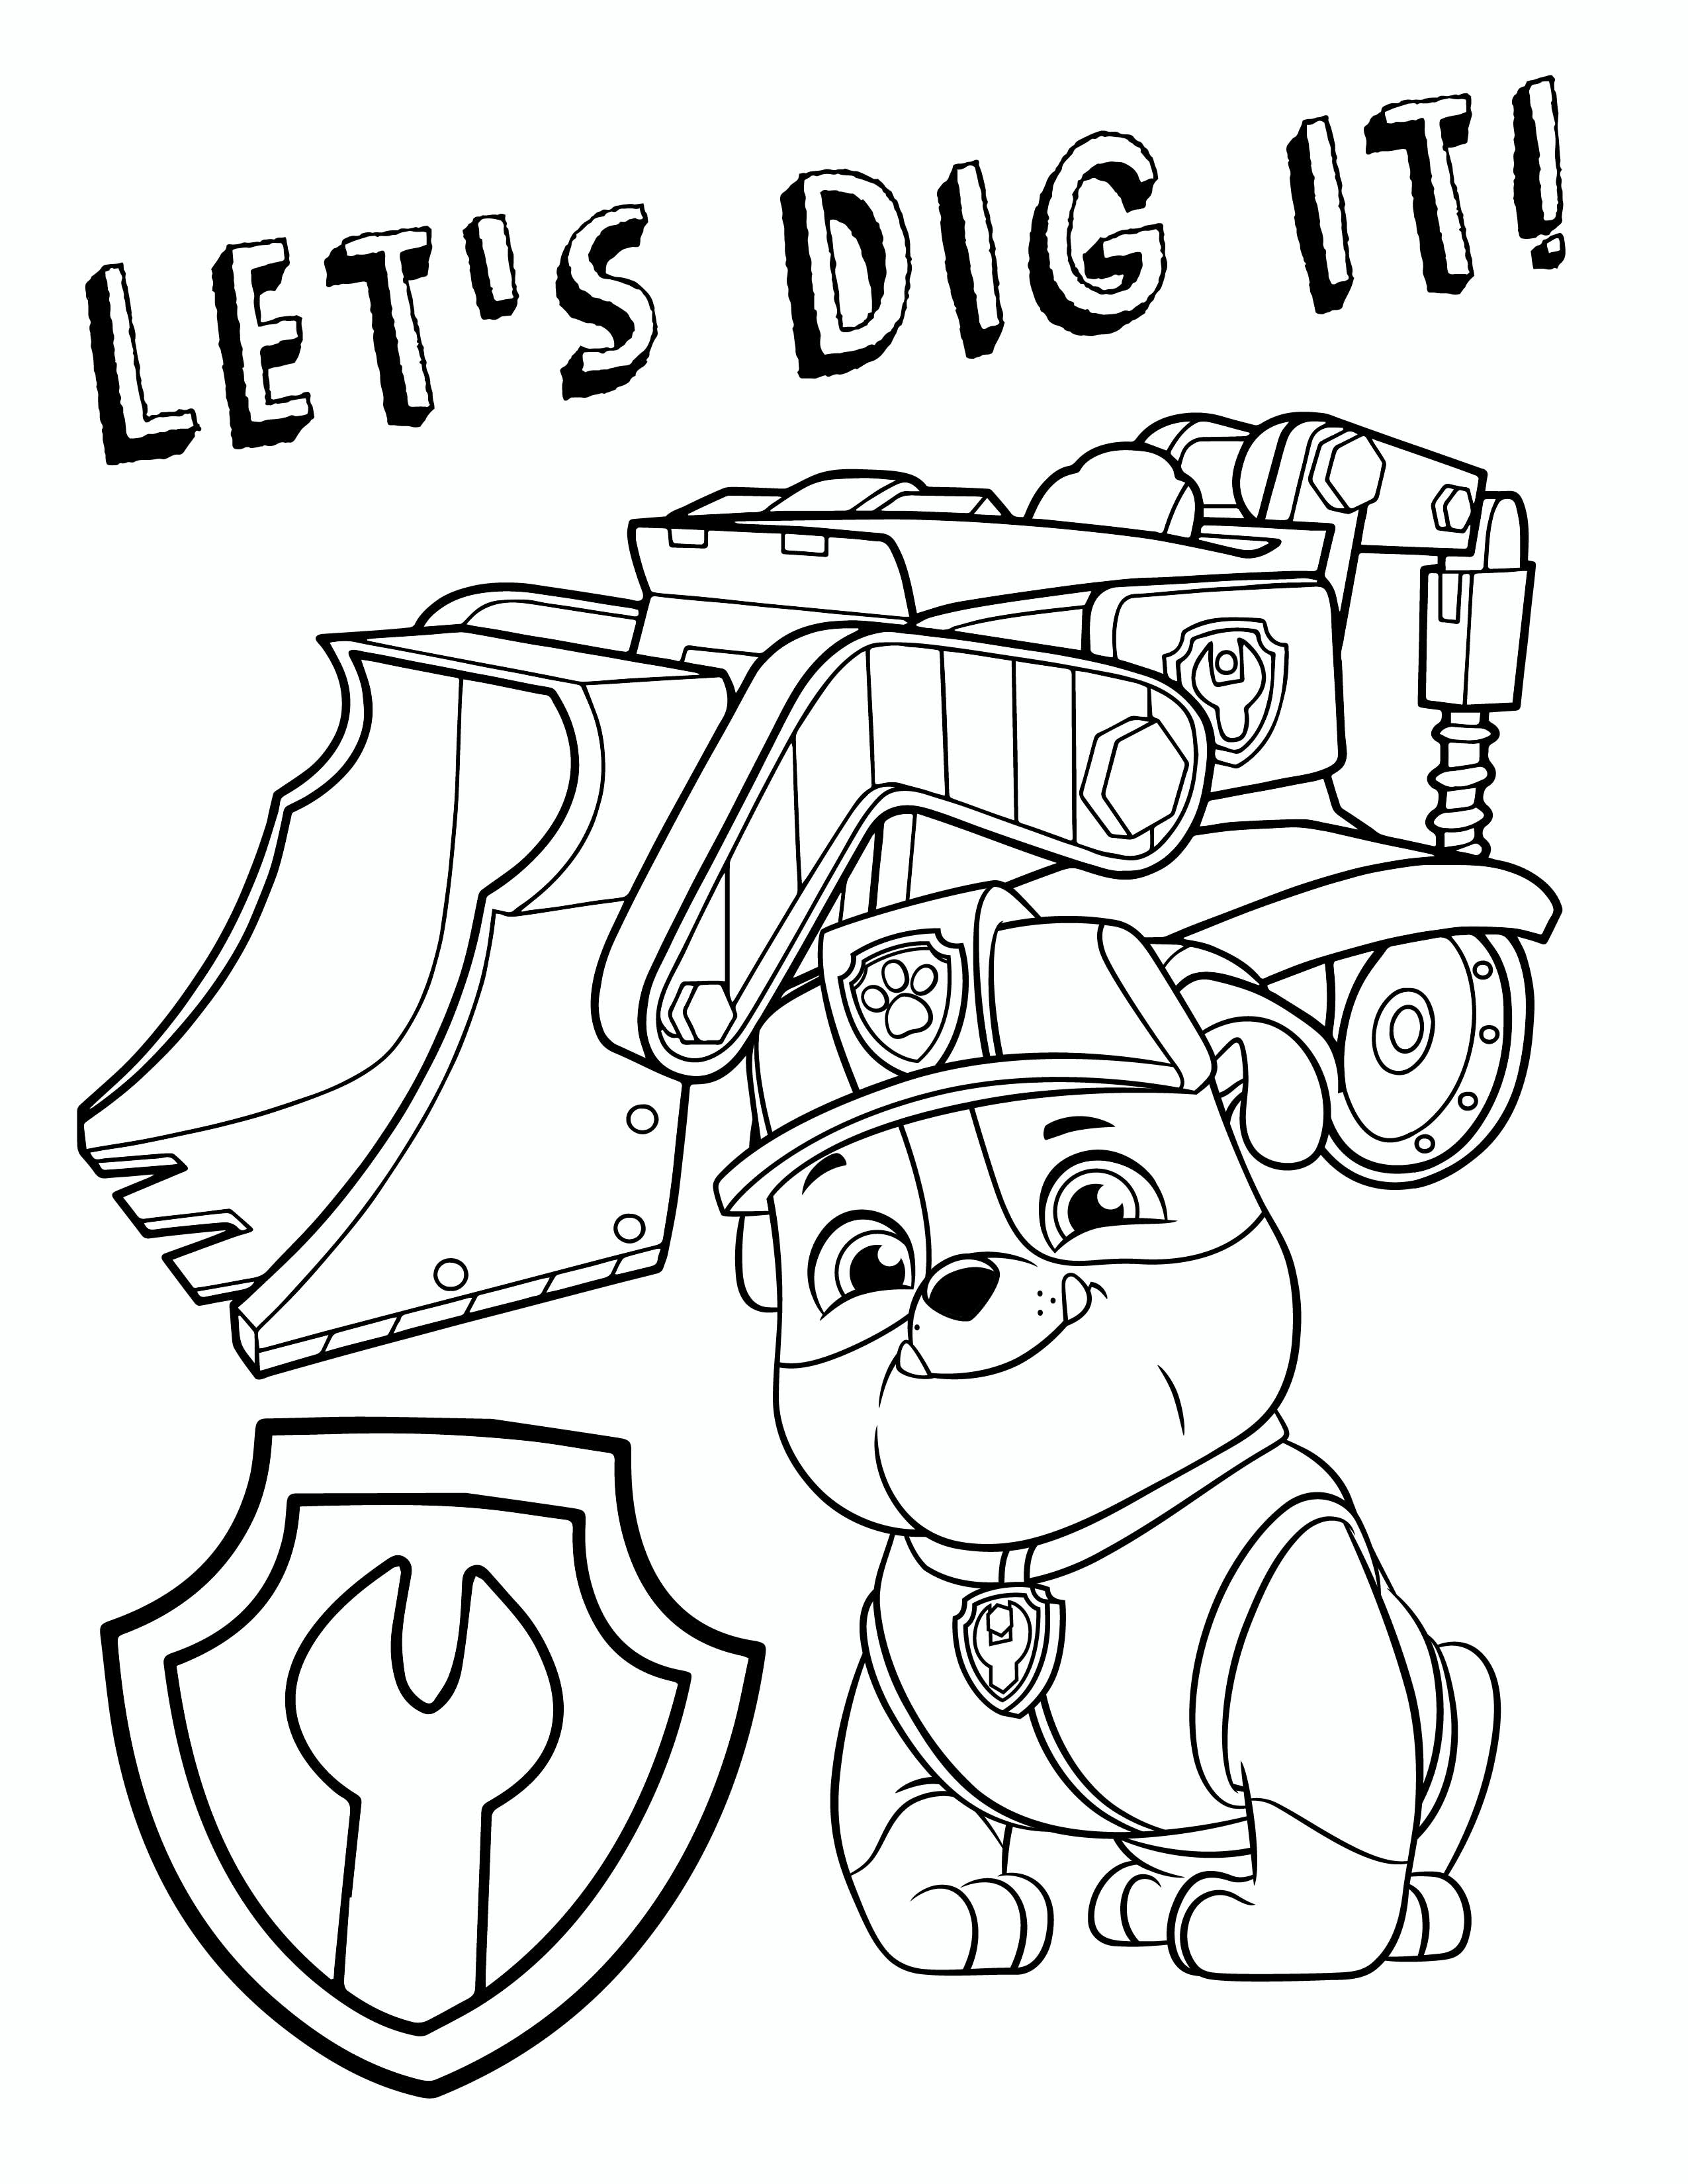 Coloring Pages : Coloring Pages Paw Patrol Free Sheets Printable Of - Free Coloring Pages Com Printable